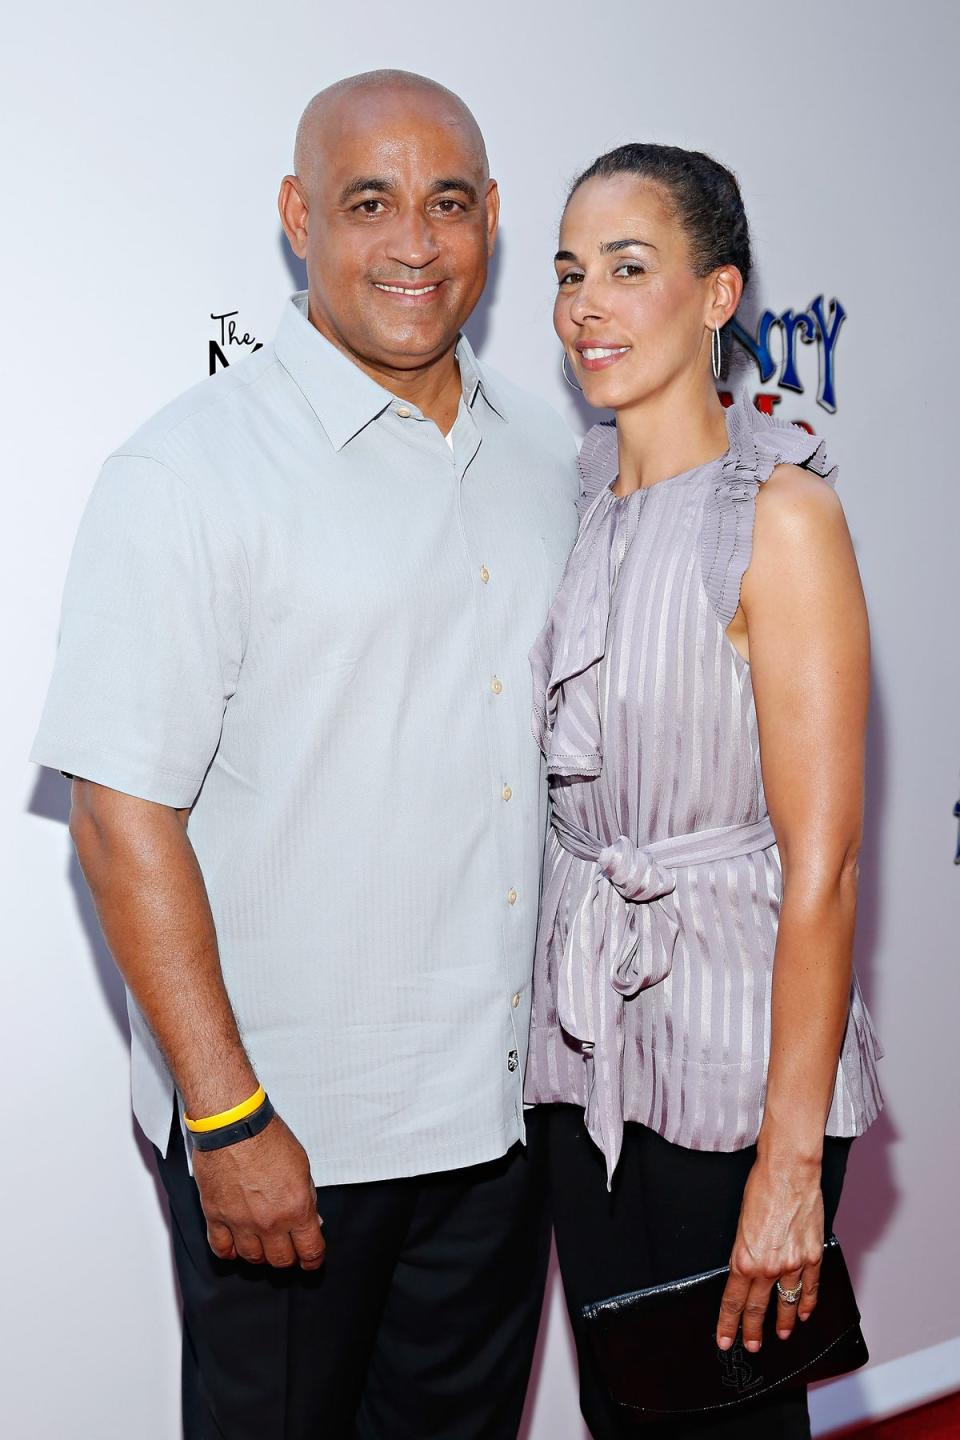 Omar Minaya and Rachel Minaya at the 'Henry & Me' New York Premiere at Ziegfeld Theatre on August 18 2014 in New York City. Rachel Minaya was found dead at her New Jersey home on Saturday (Getty Images)